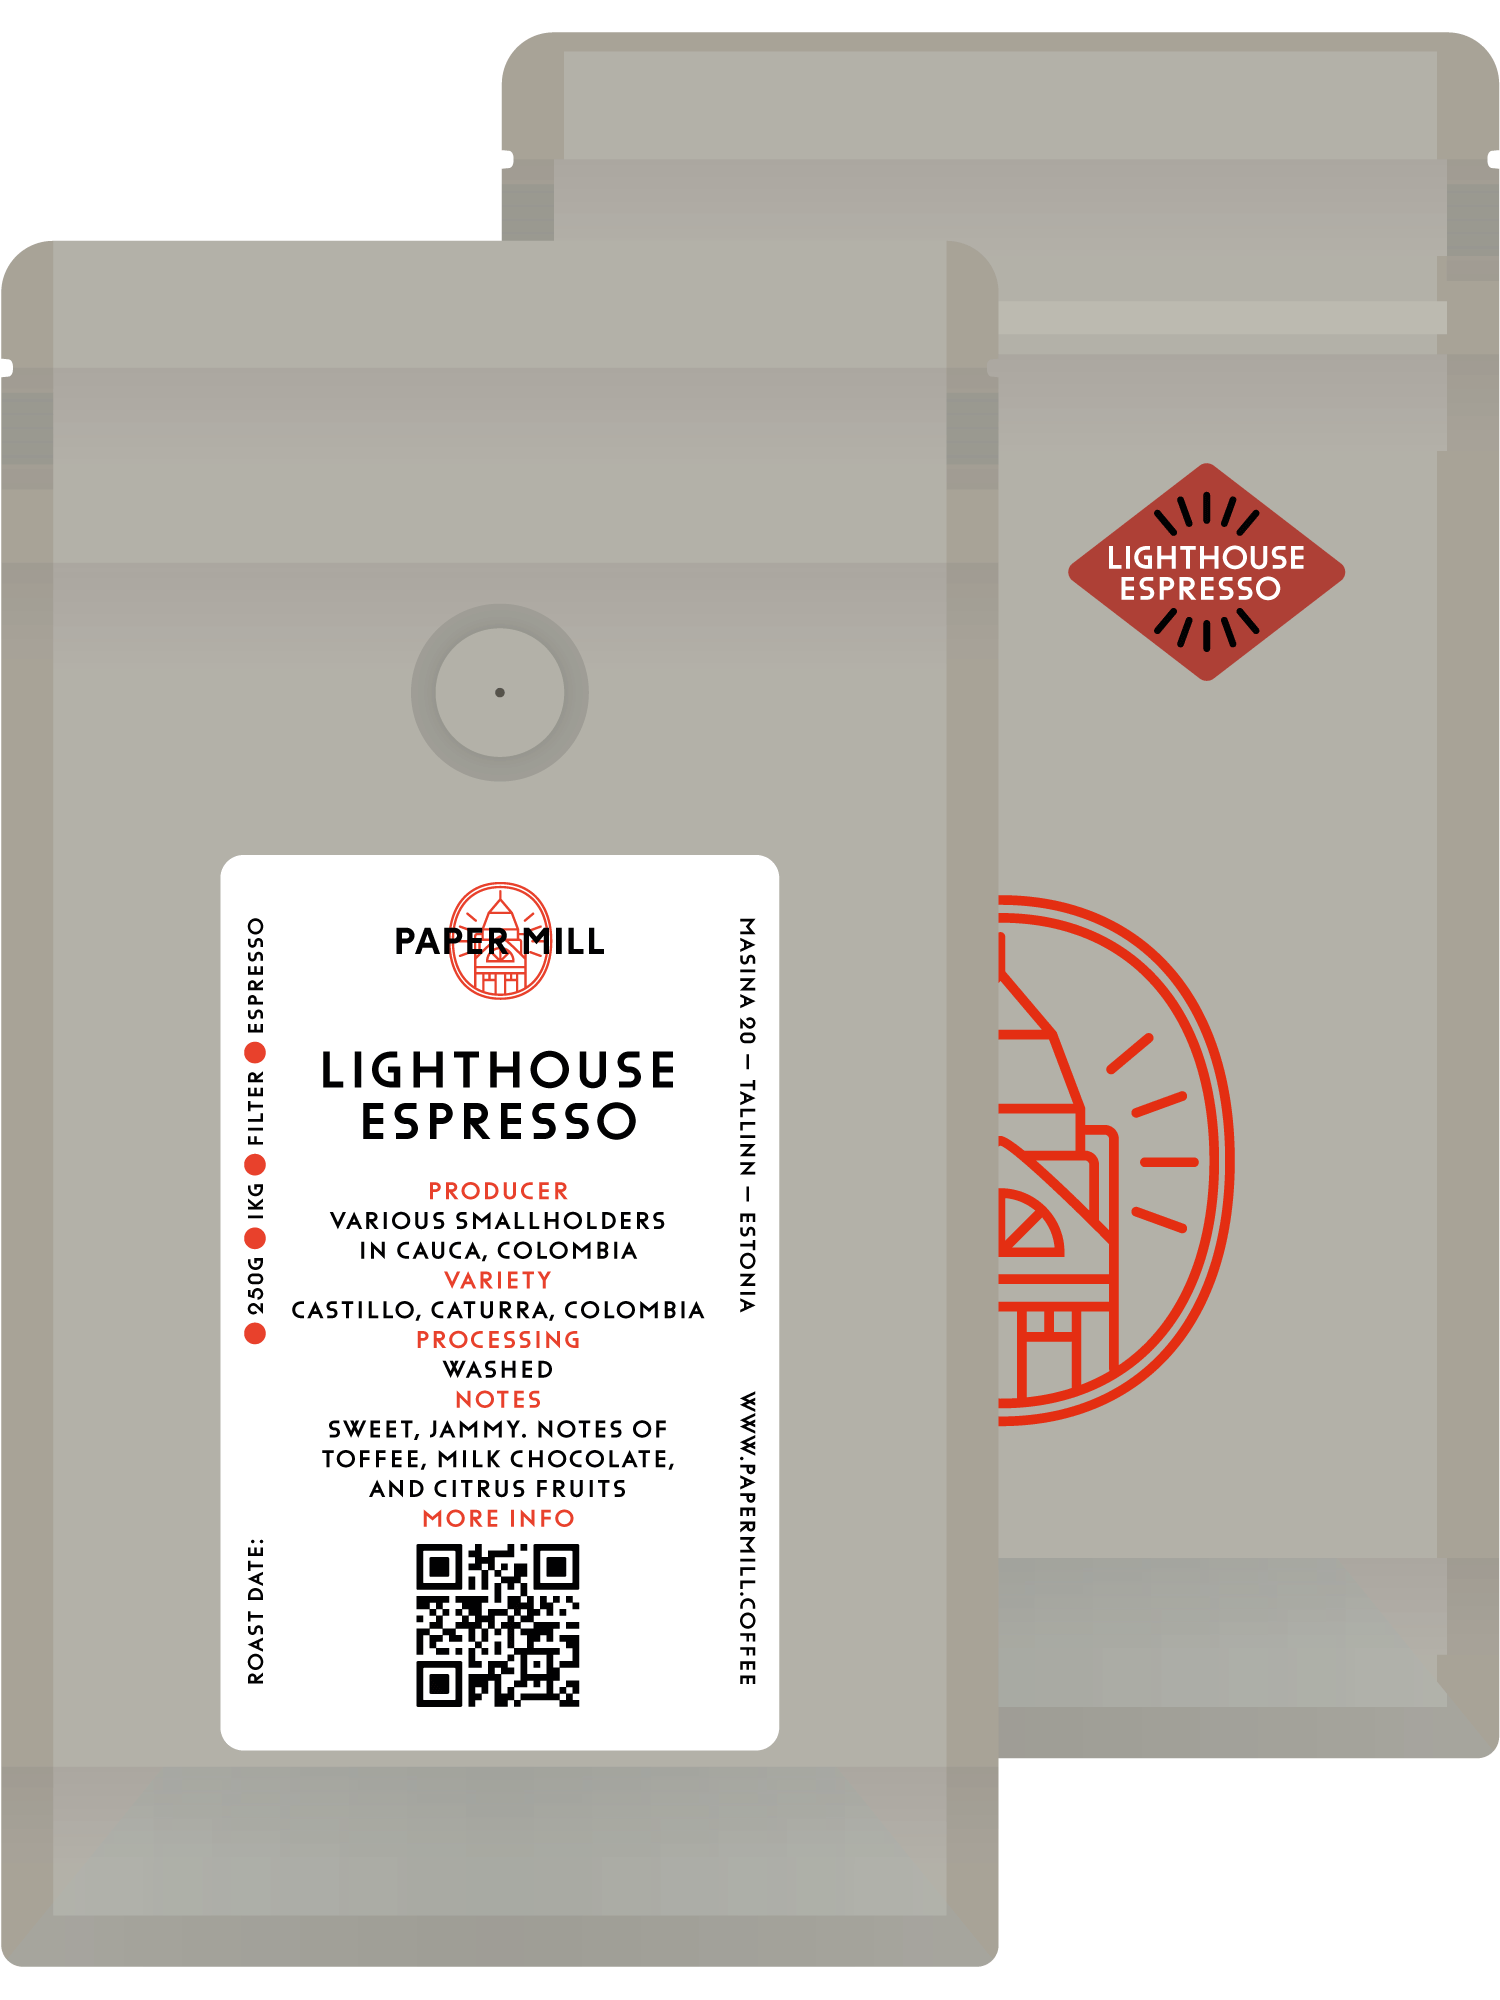 lightroast speciality coffee that tastes like toffee, milk chocolate and citrus fruits